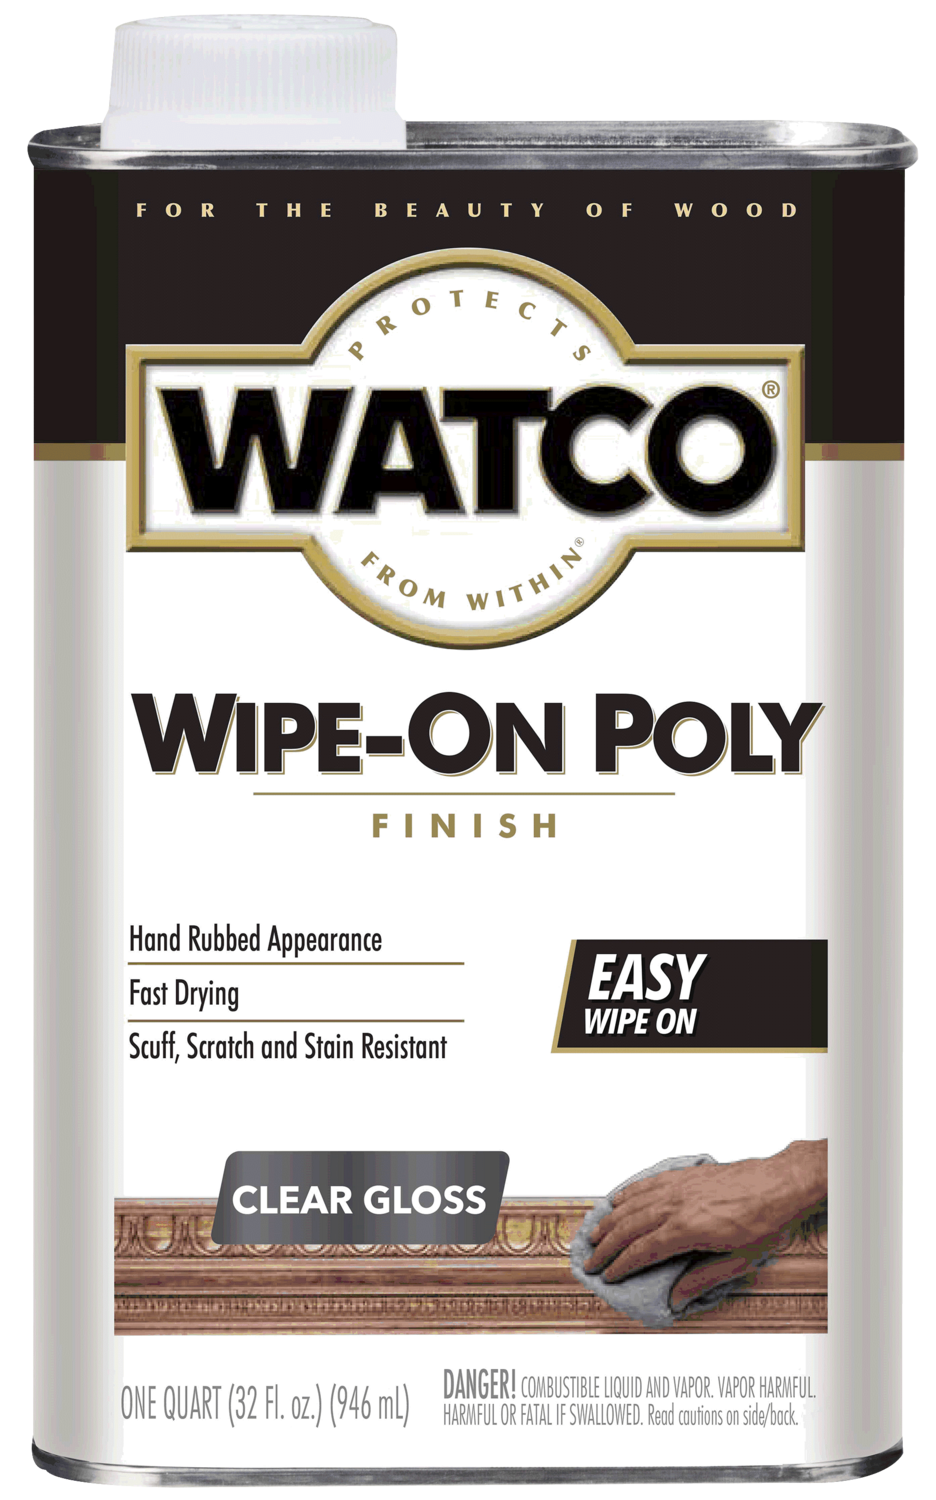 Watco Wip-on Poly